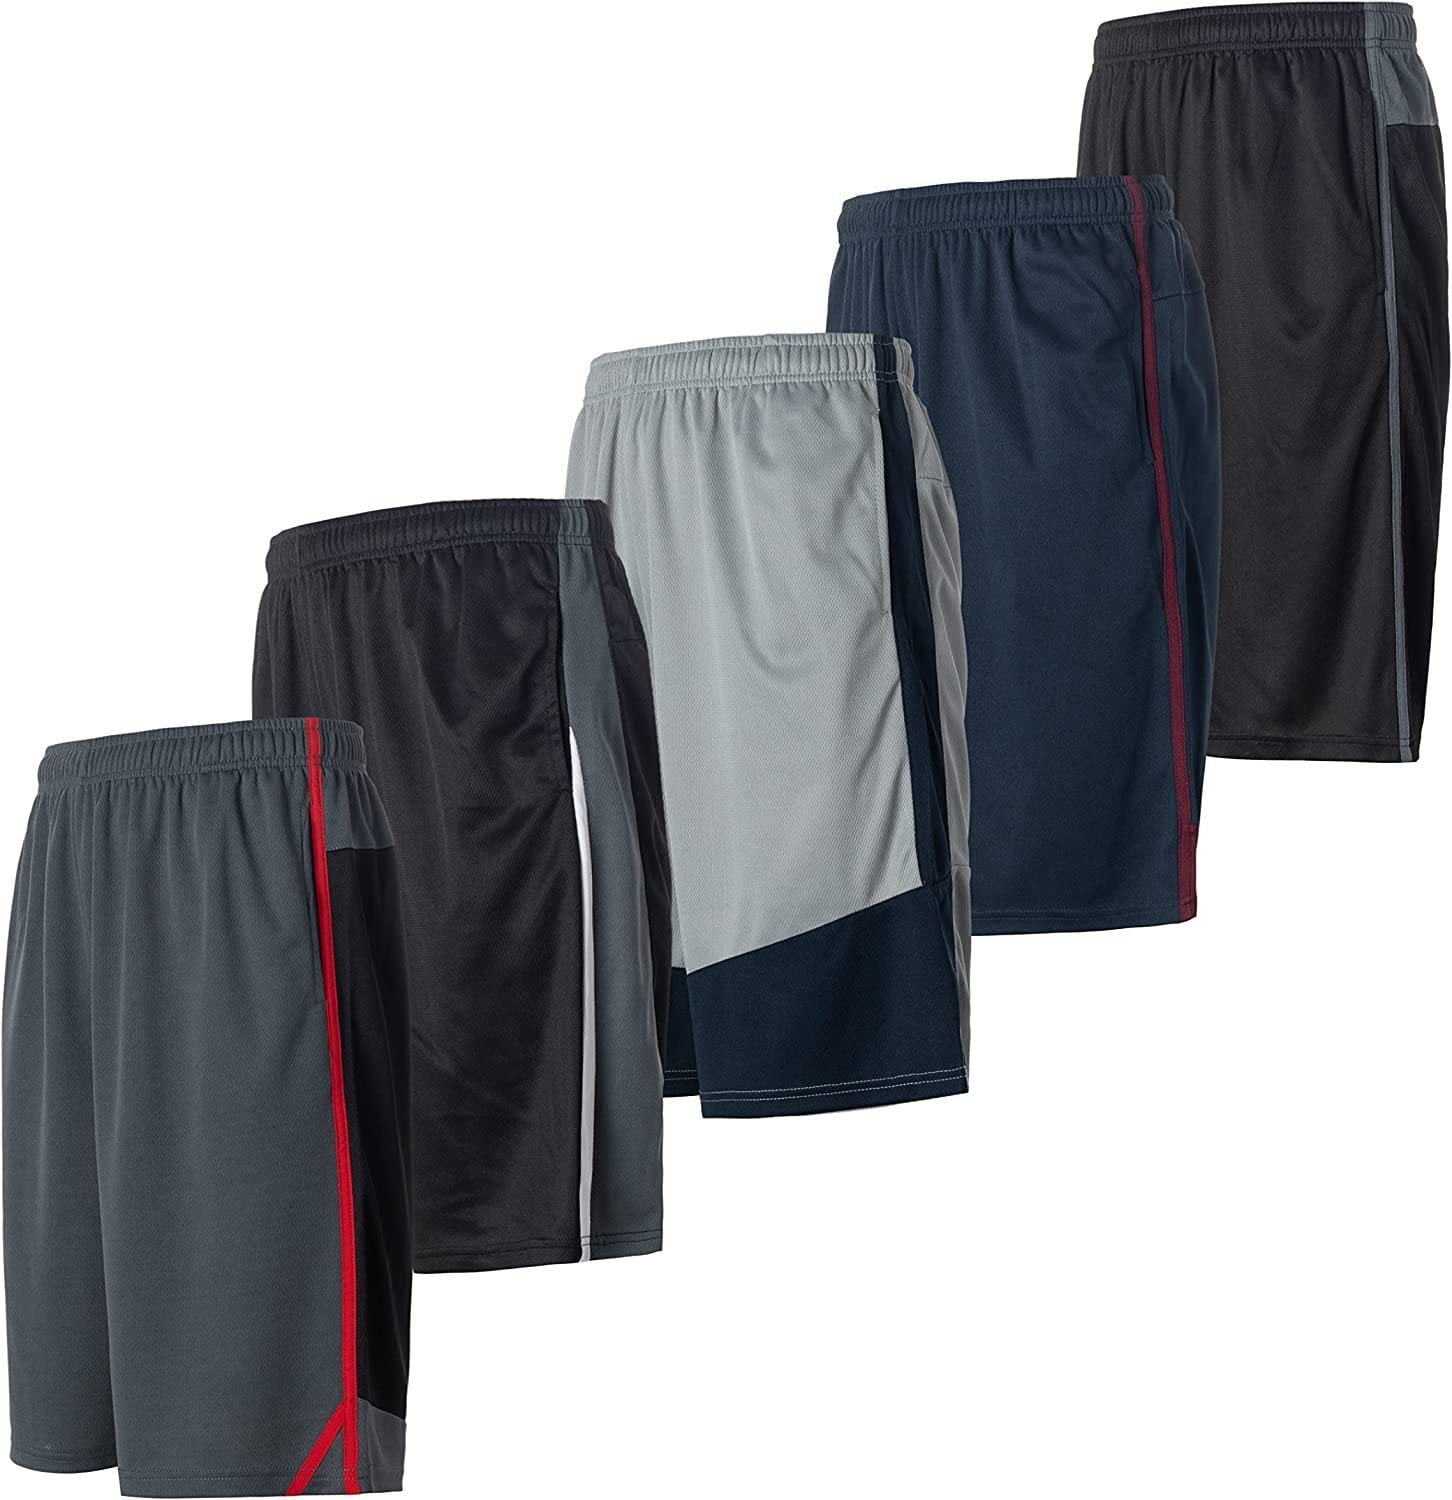 Athletic Shorts for Men - 5 Pack Pack Men's Activewear Quick Dry ...